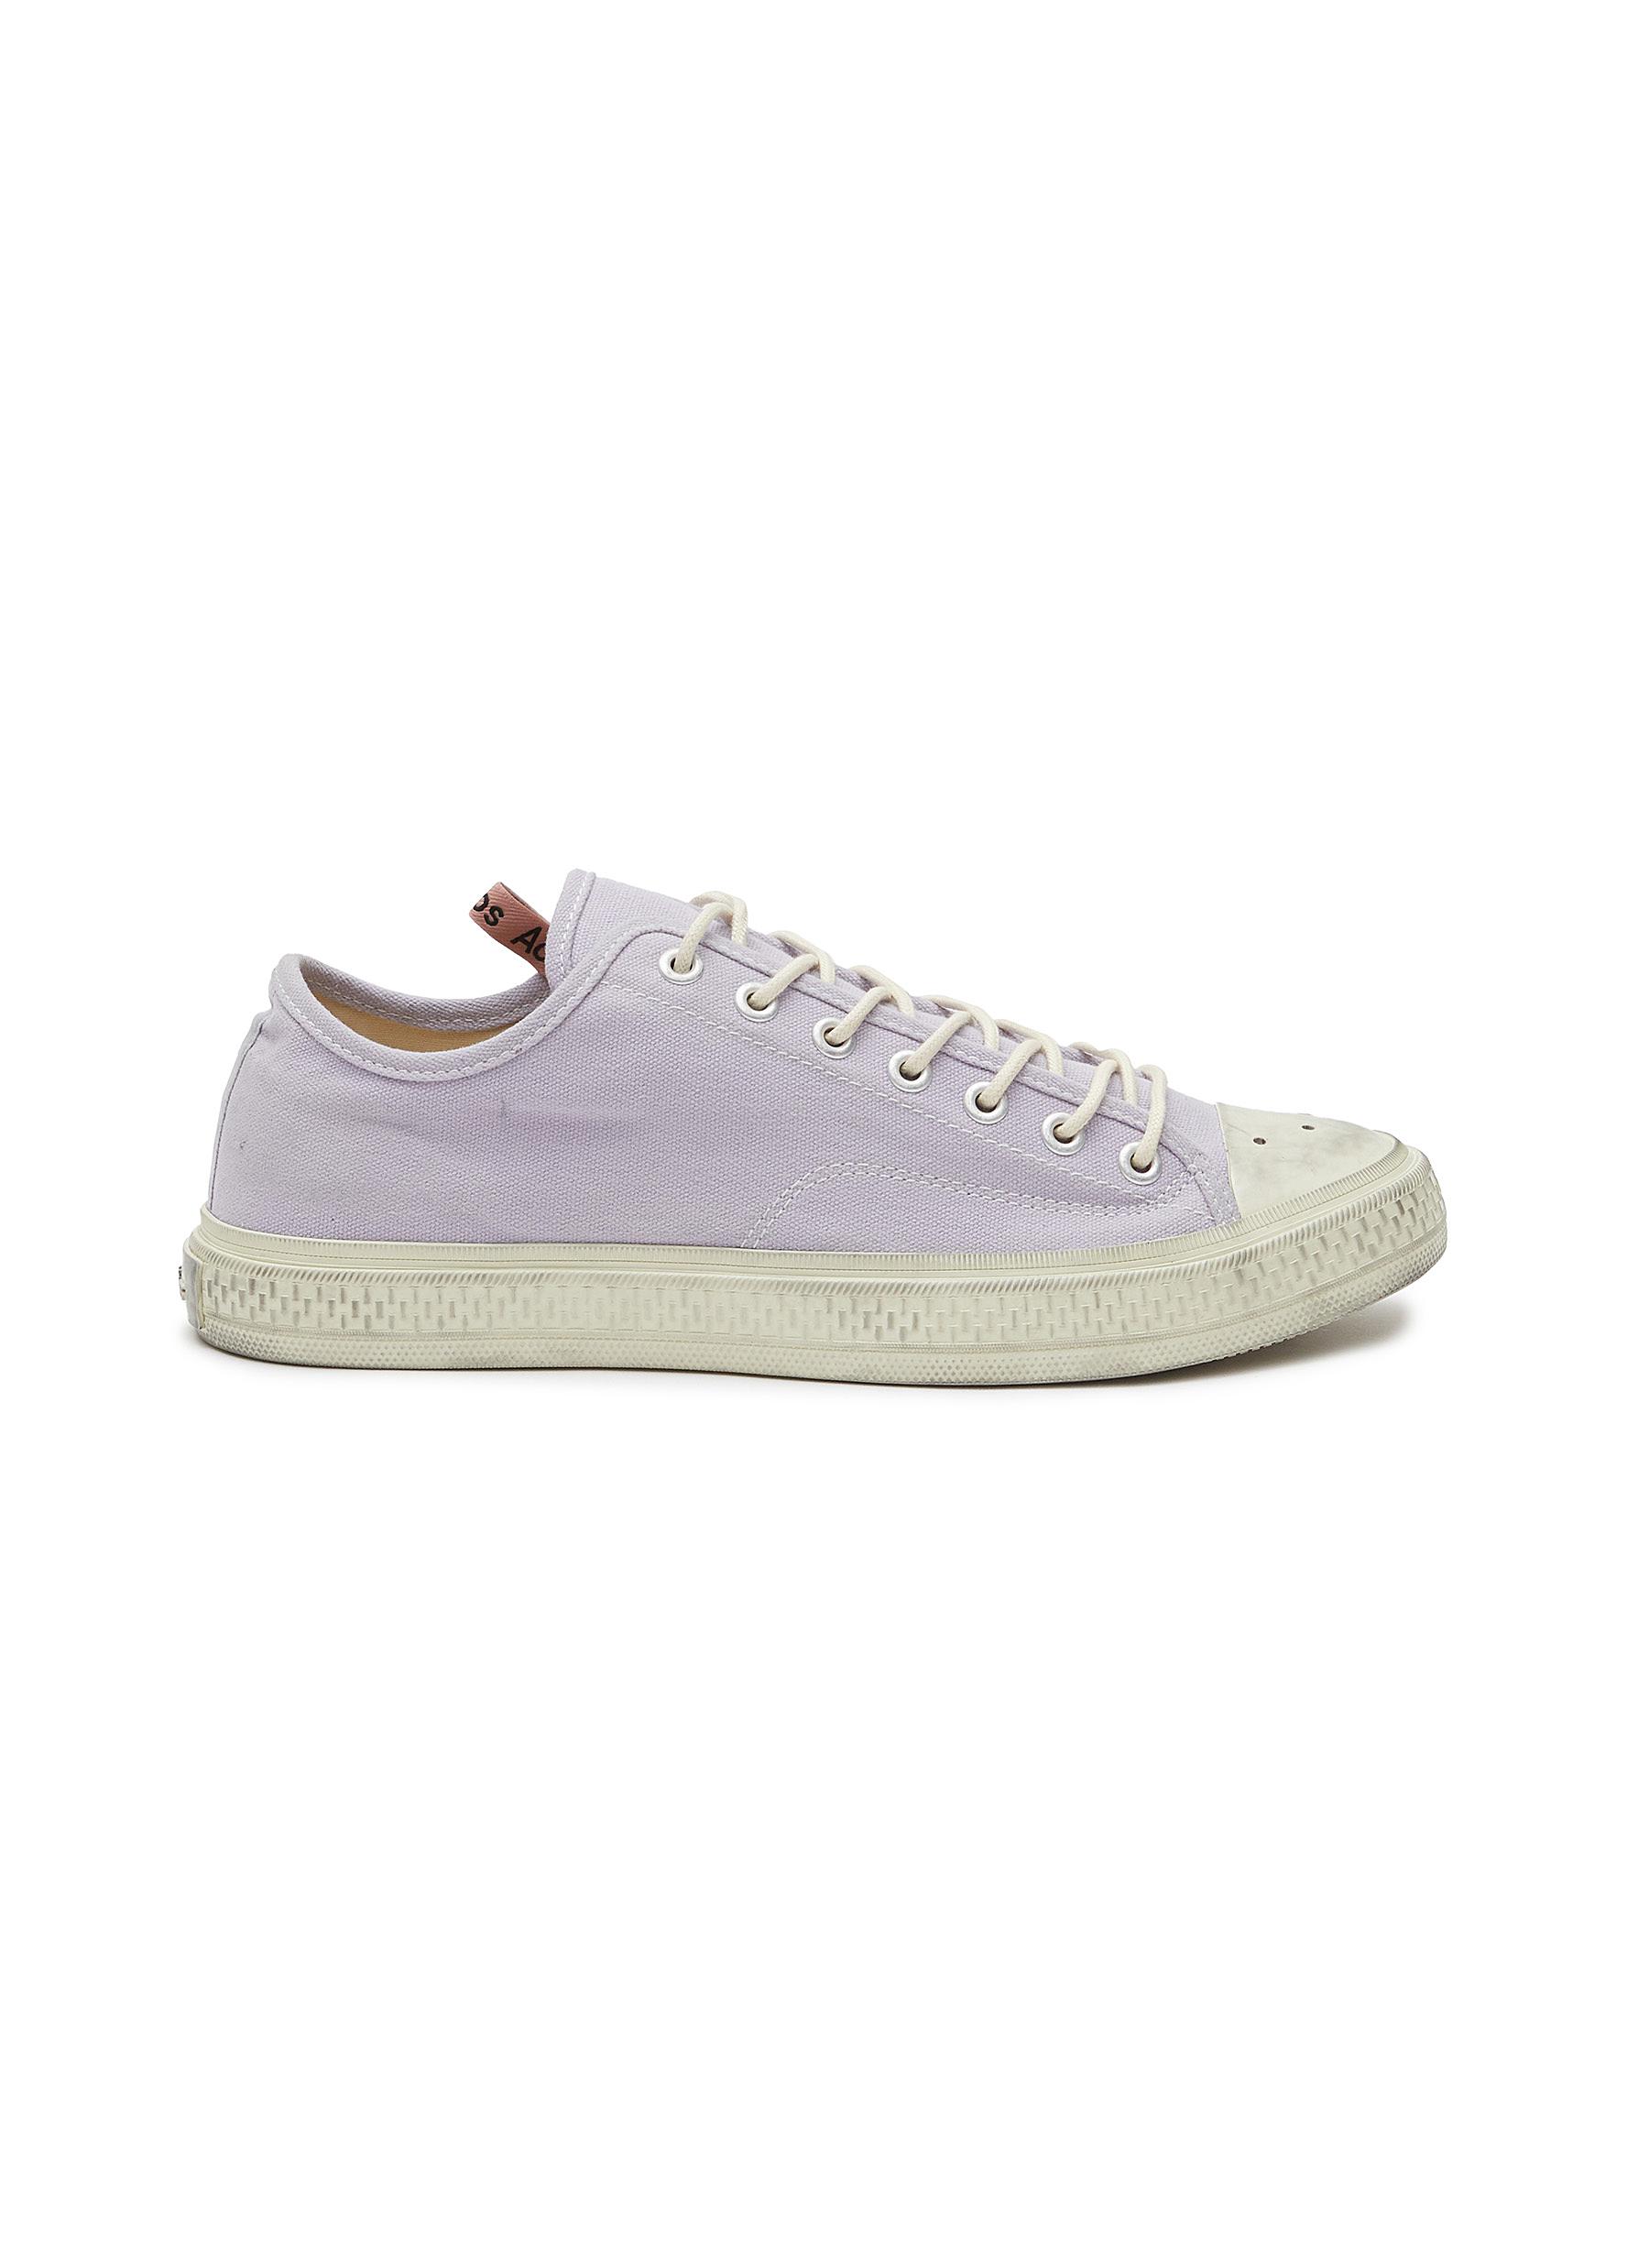 ACNE STUDIOS TUMBLED CANVAS LOW TOP LACE UP SNEAKERS